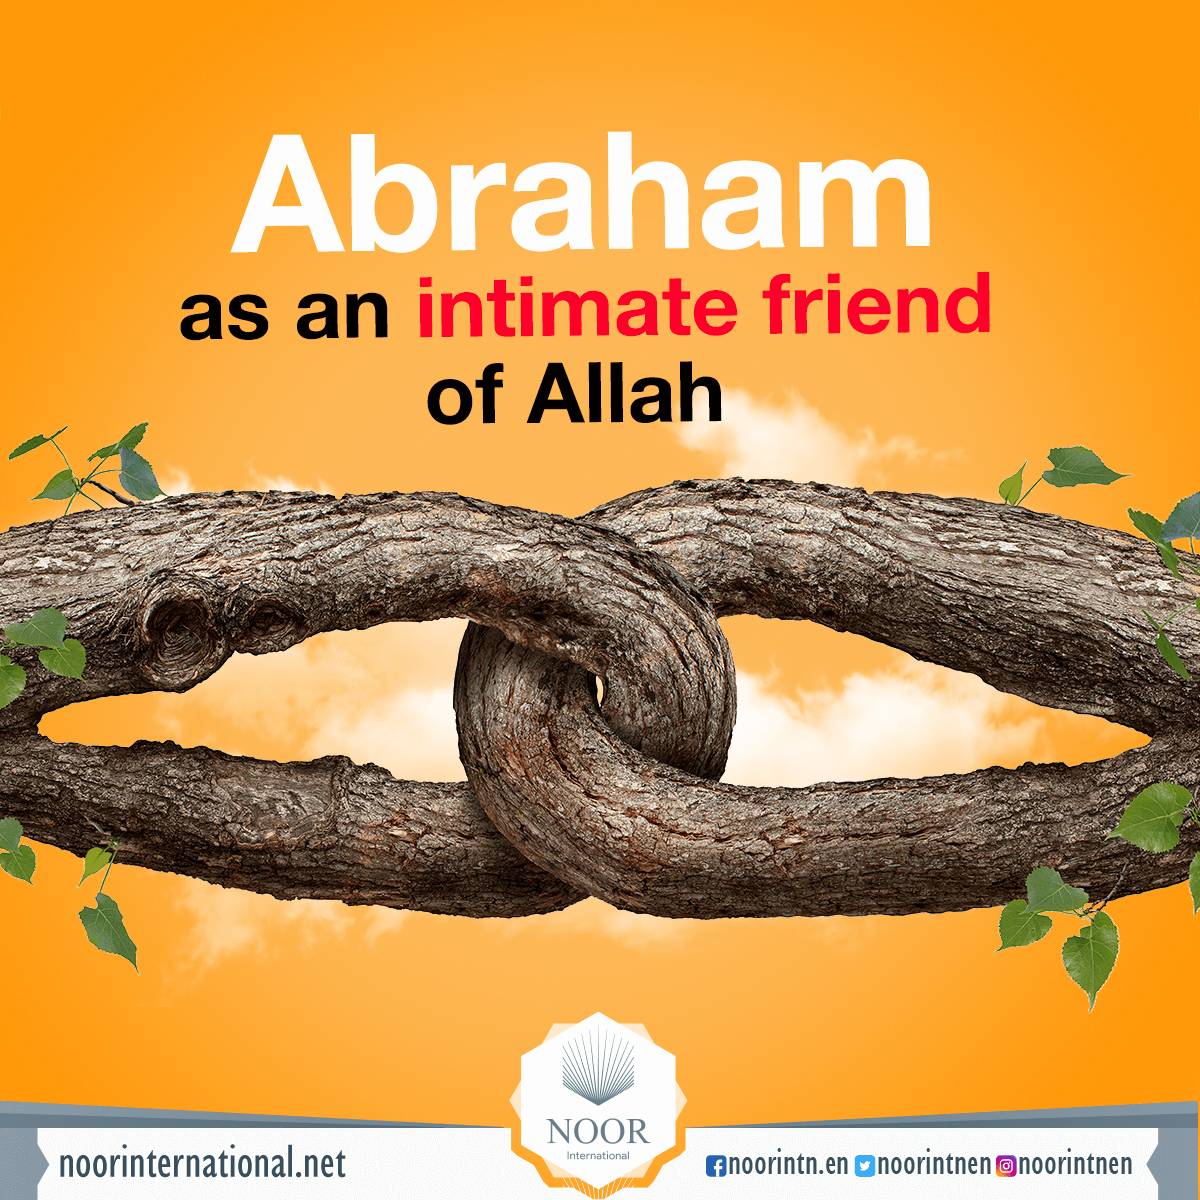 Abraham as an intimate friend of Allah